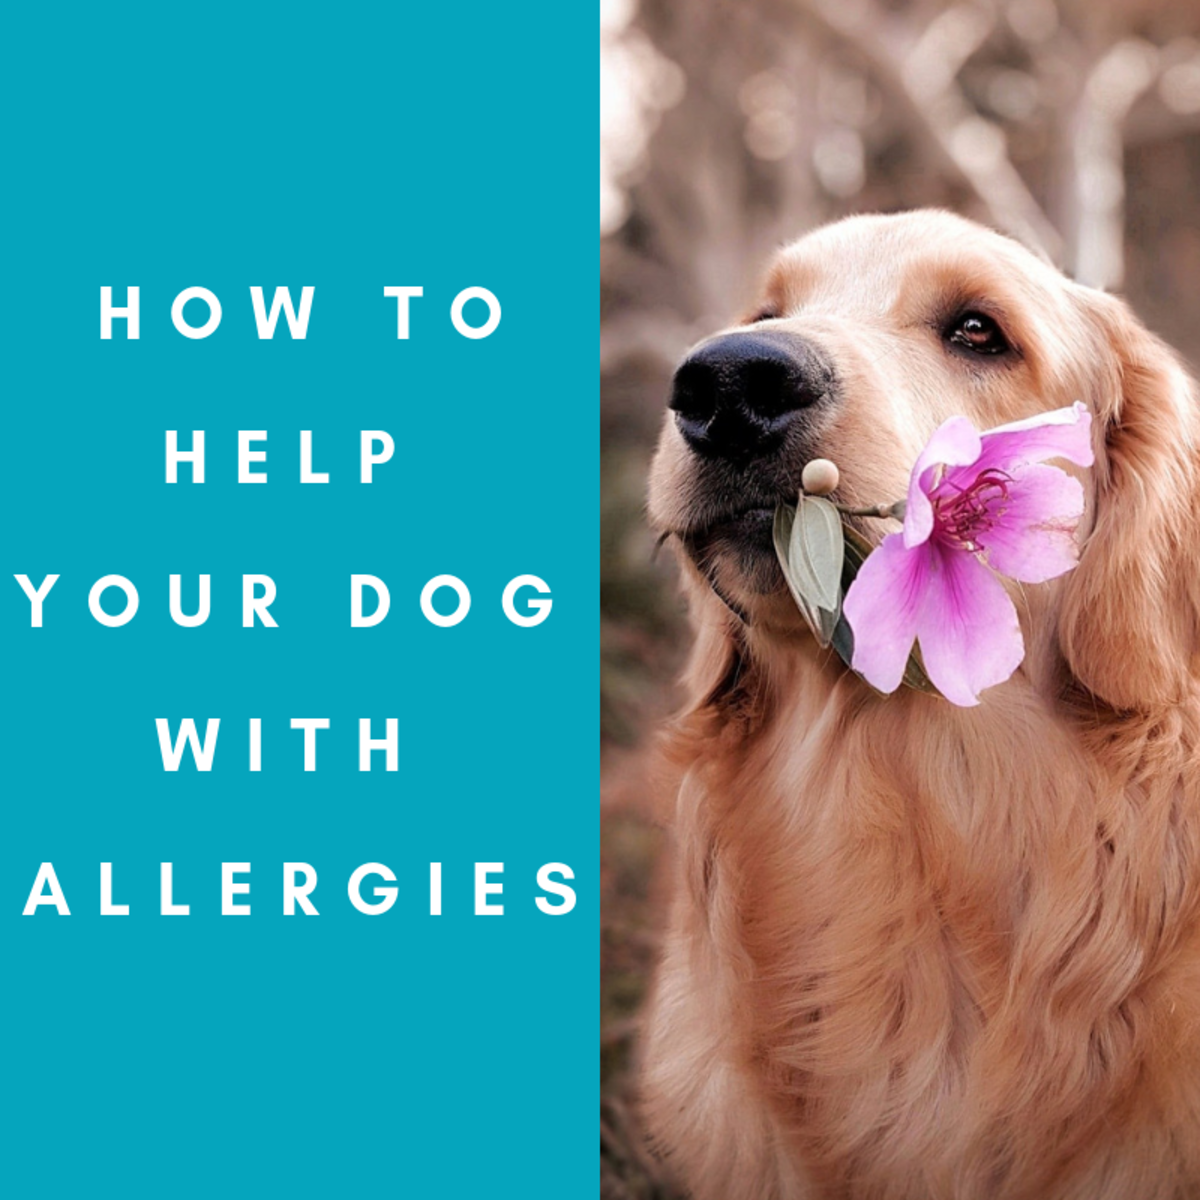 How to Help My Dog With Allergies